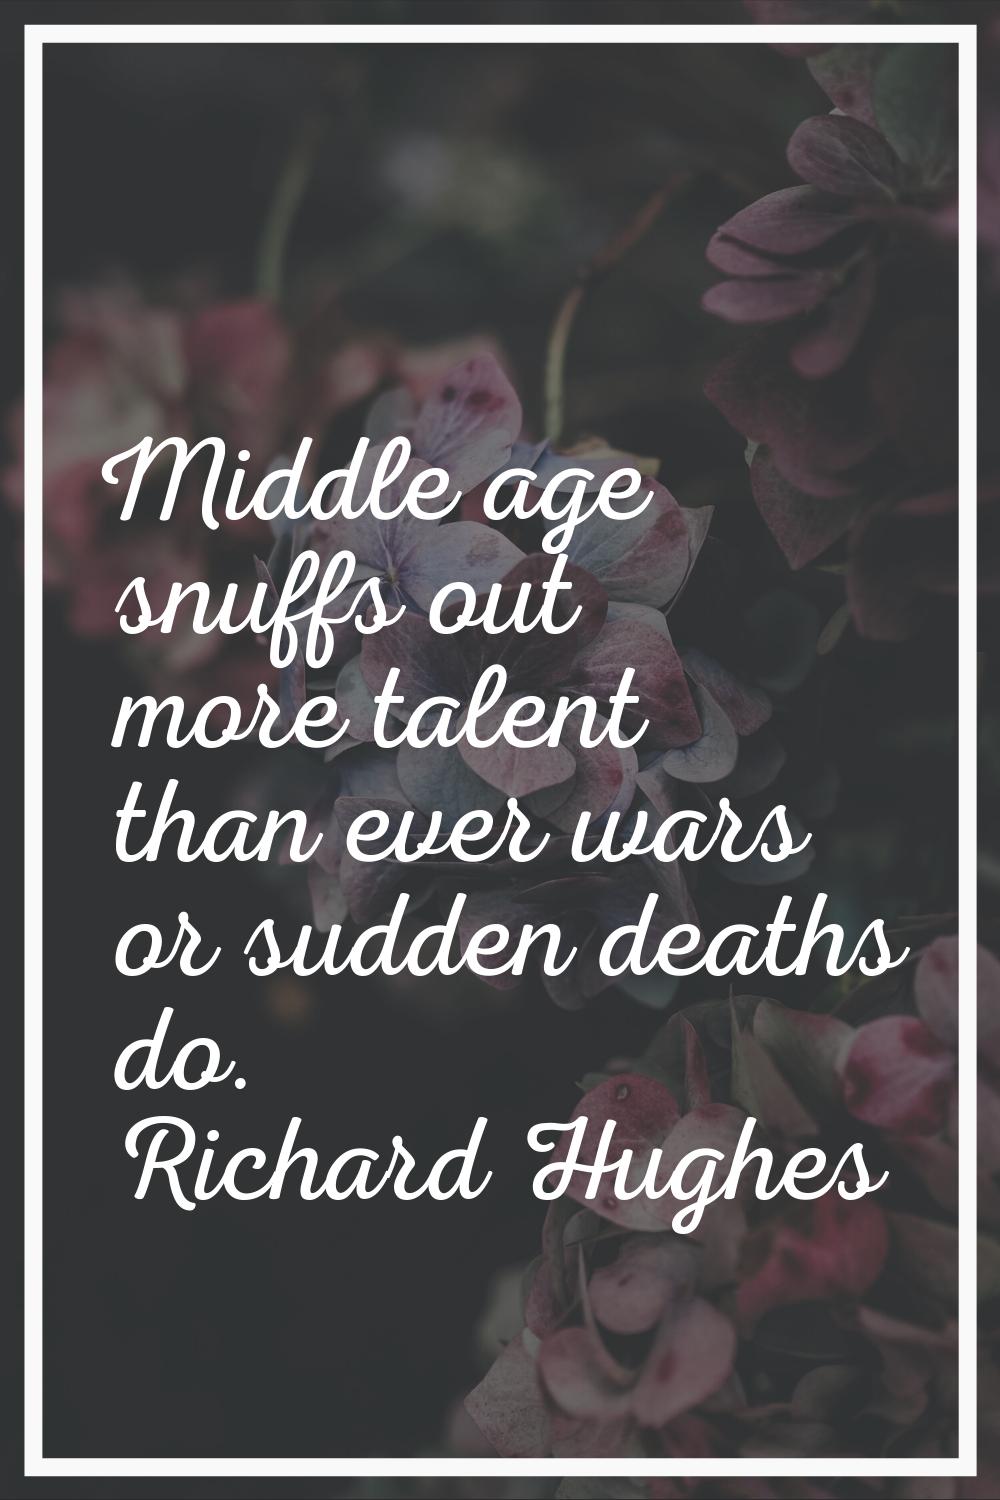 Middle age snuffs out more talent than ever wars or sudden deaths do.